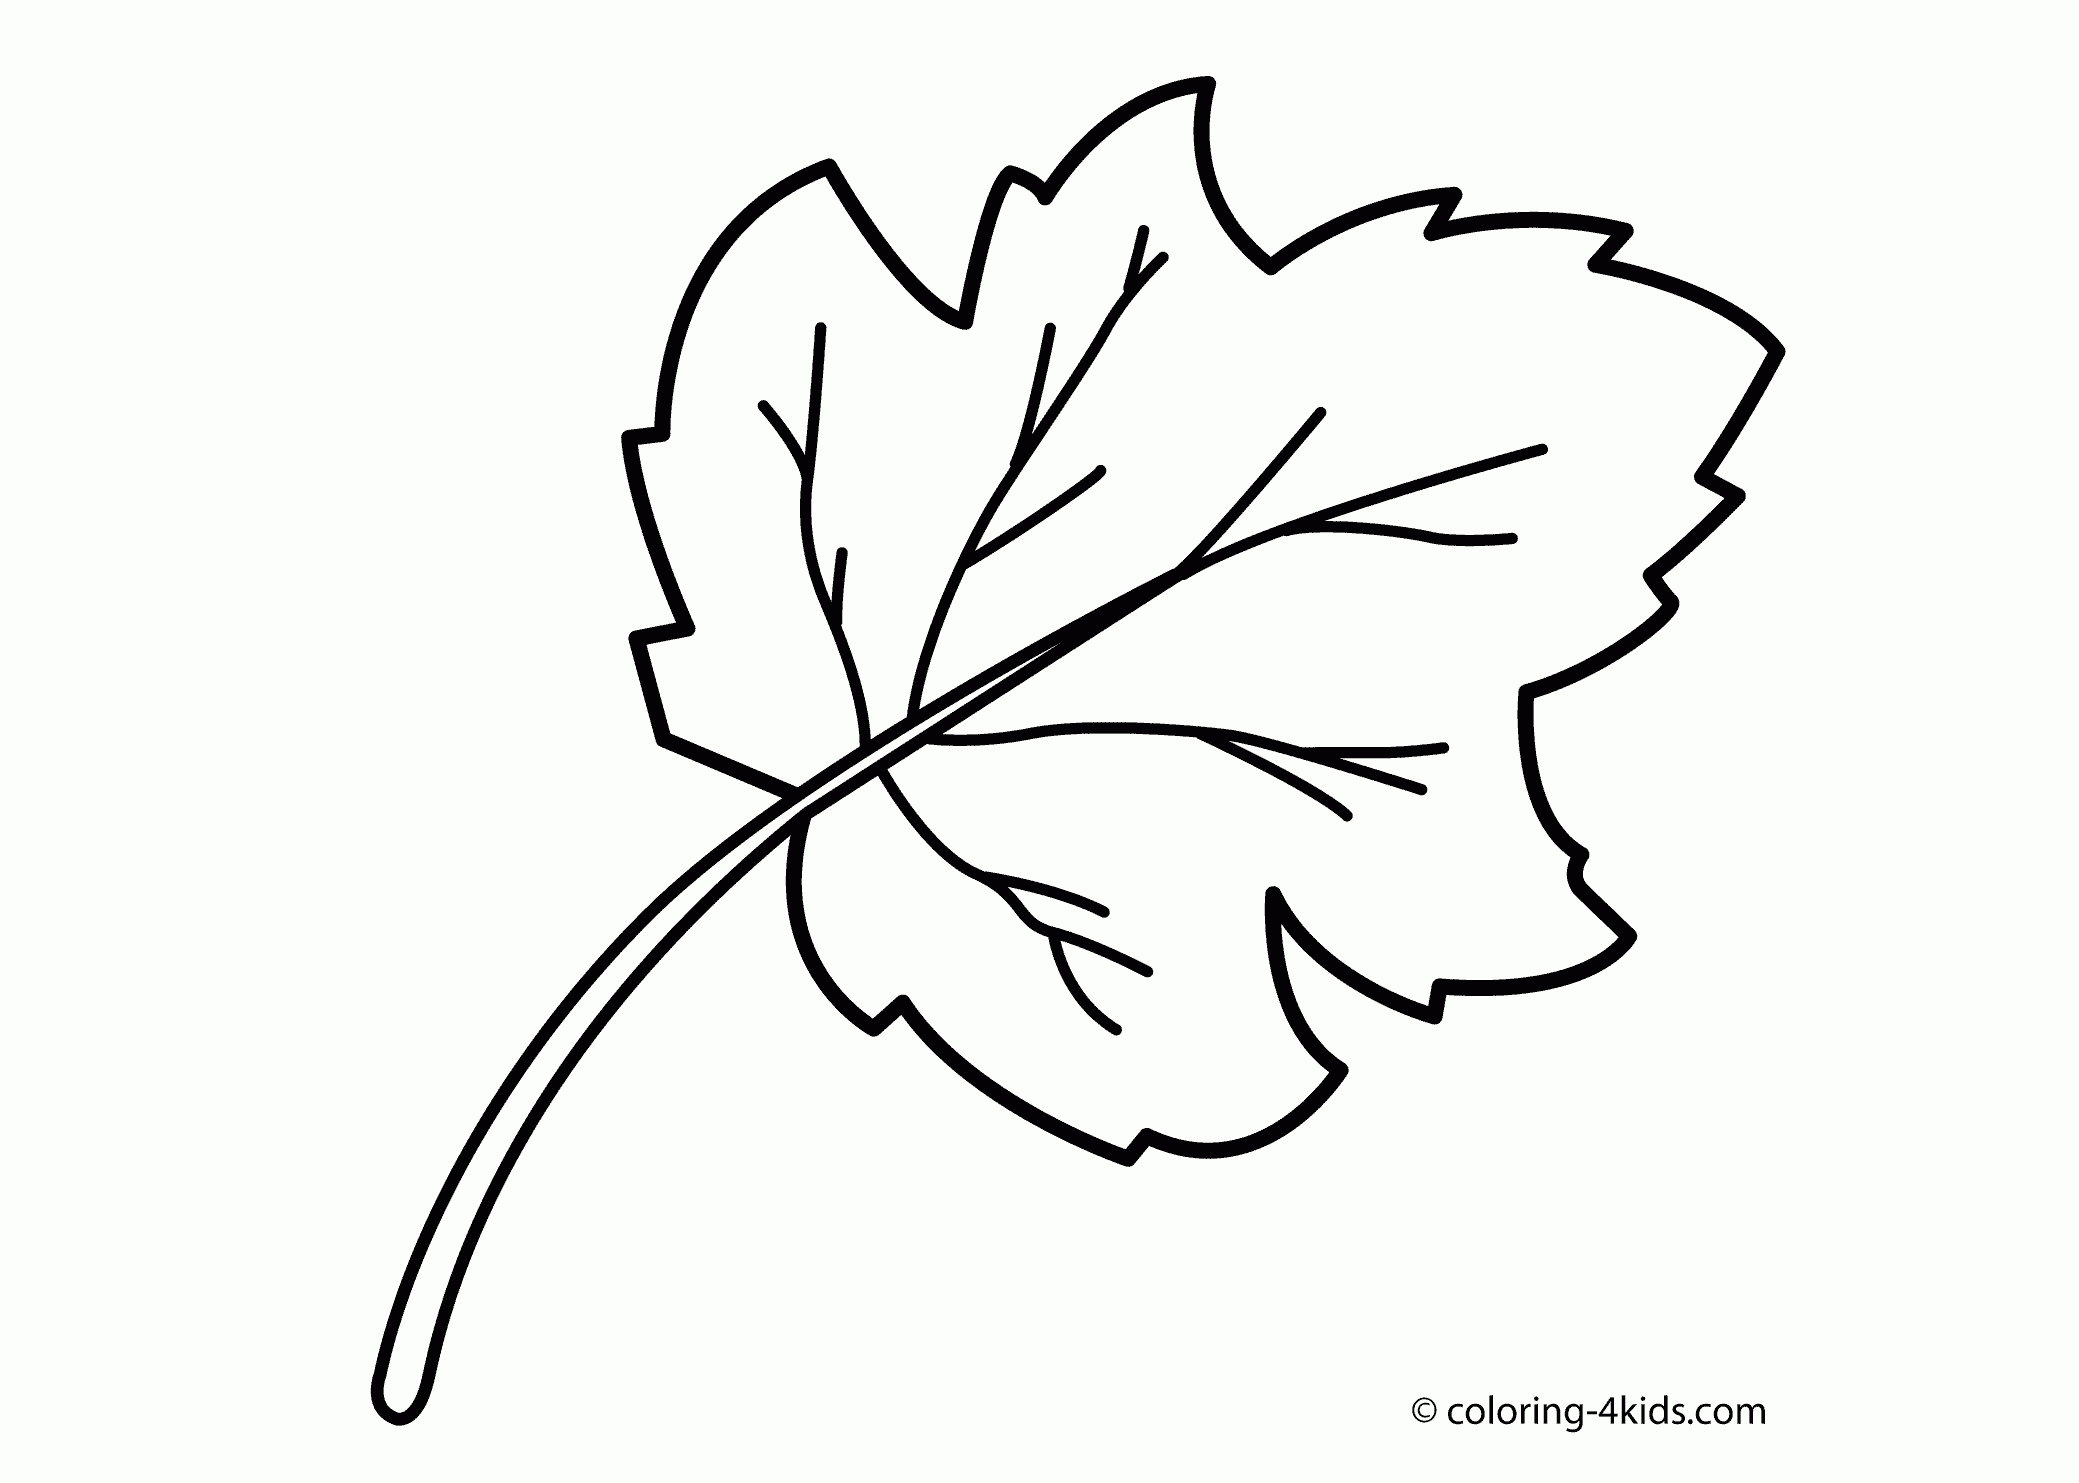 Related Leaf Coloring Pages item-13081, Leaf Coloring Pages Fall ...